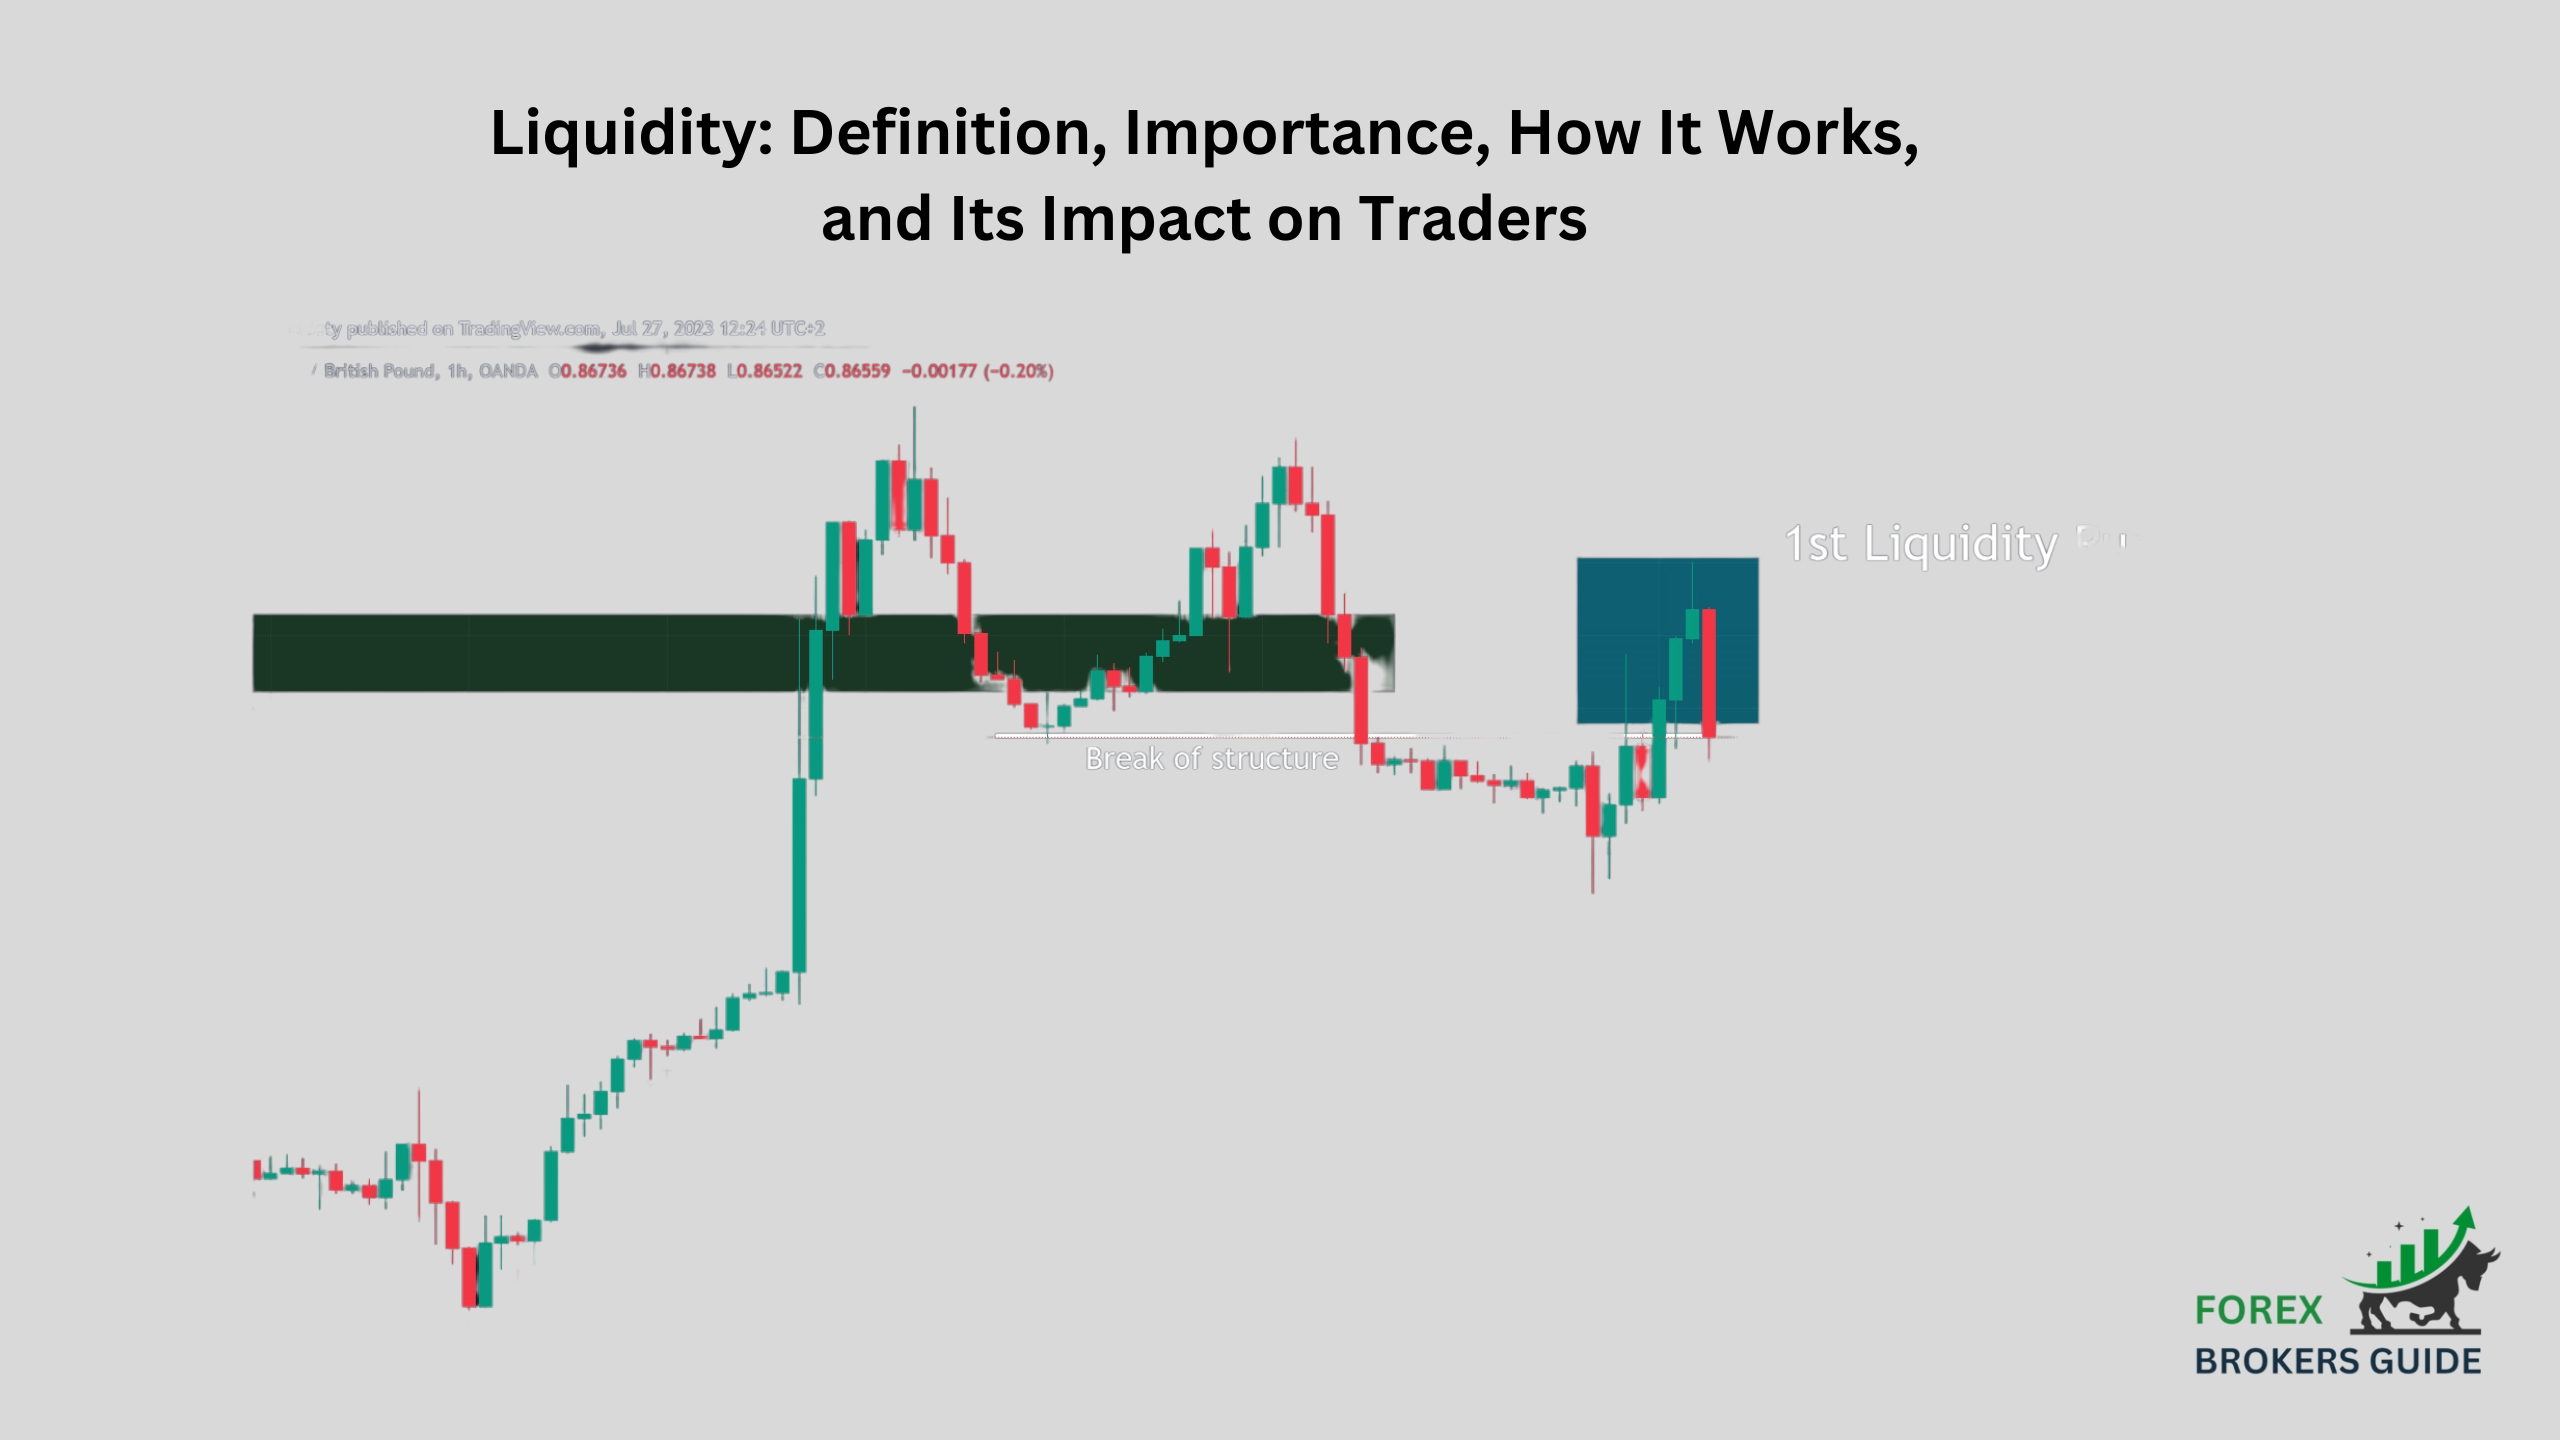 Liquidity Definition, Importance, How It Works, and Its Impact on Traders